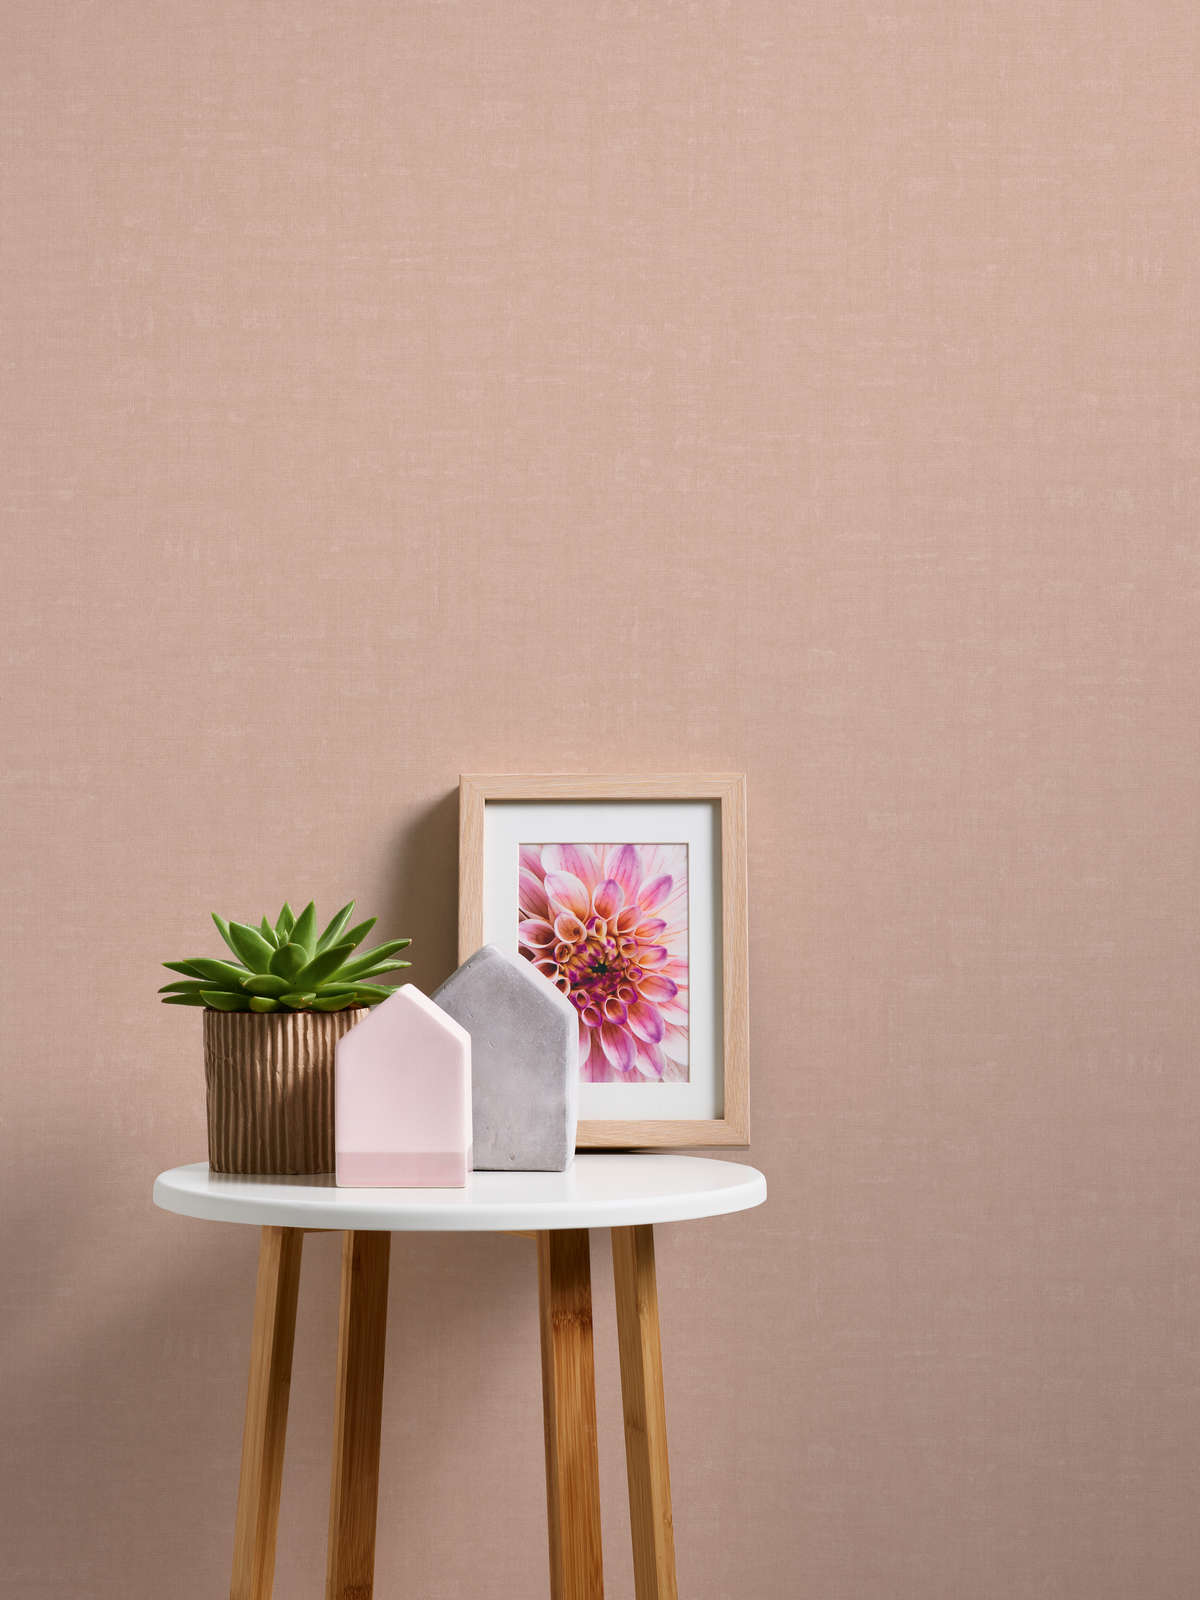             Pink wallpaper plain and mottled with texture embossing
        